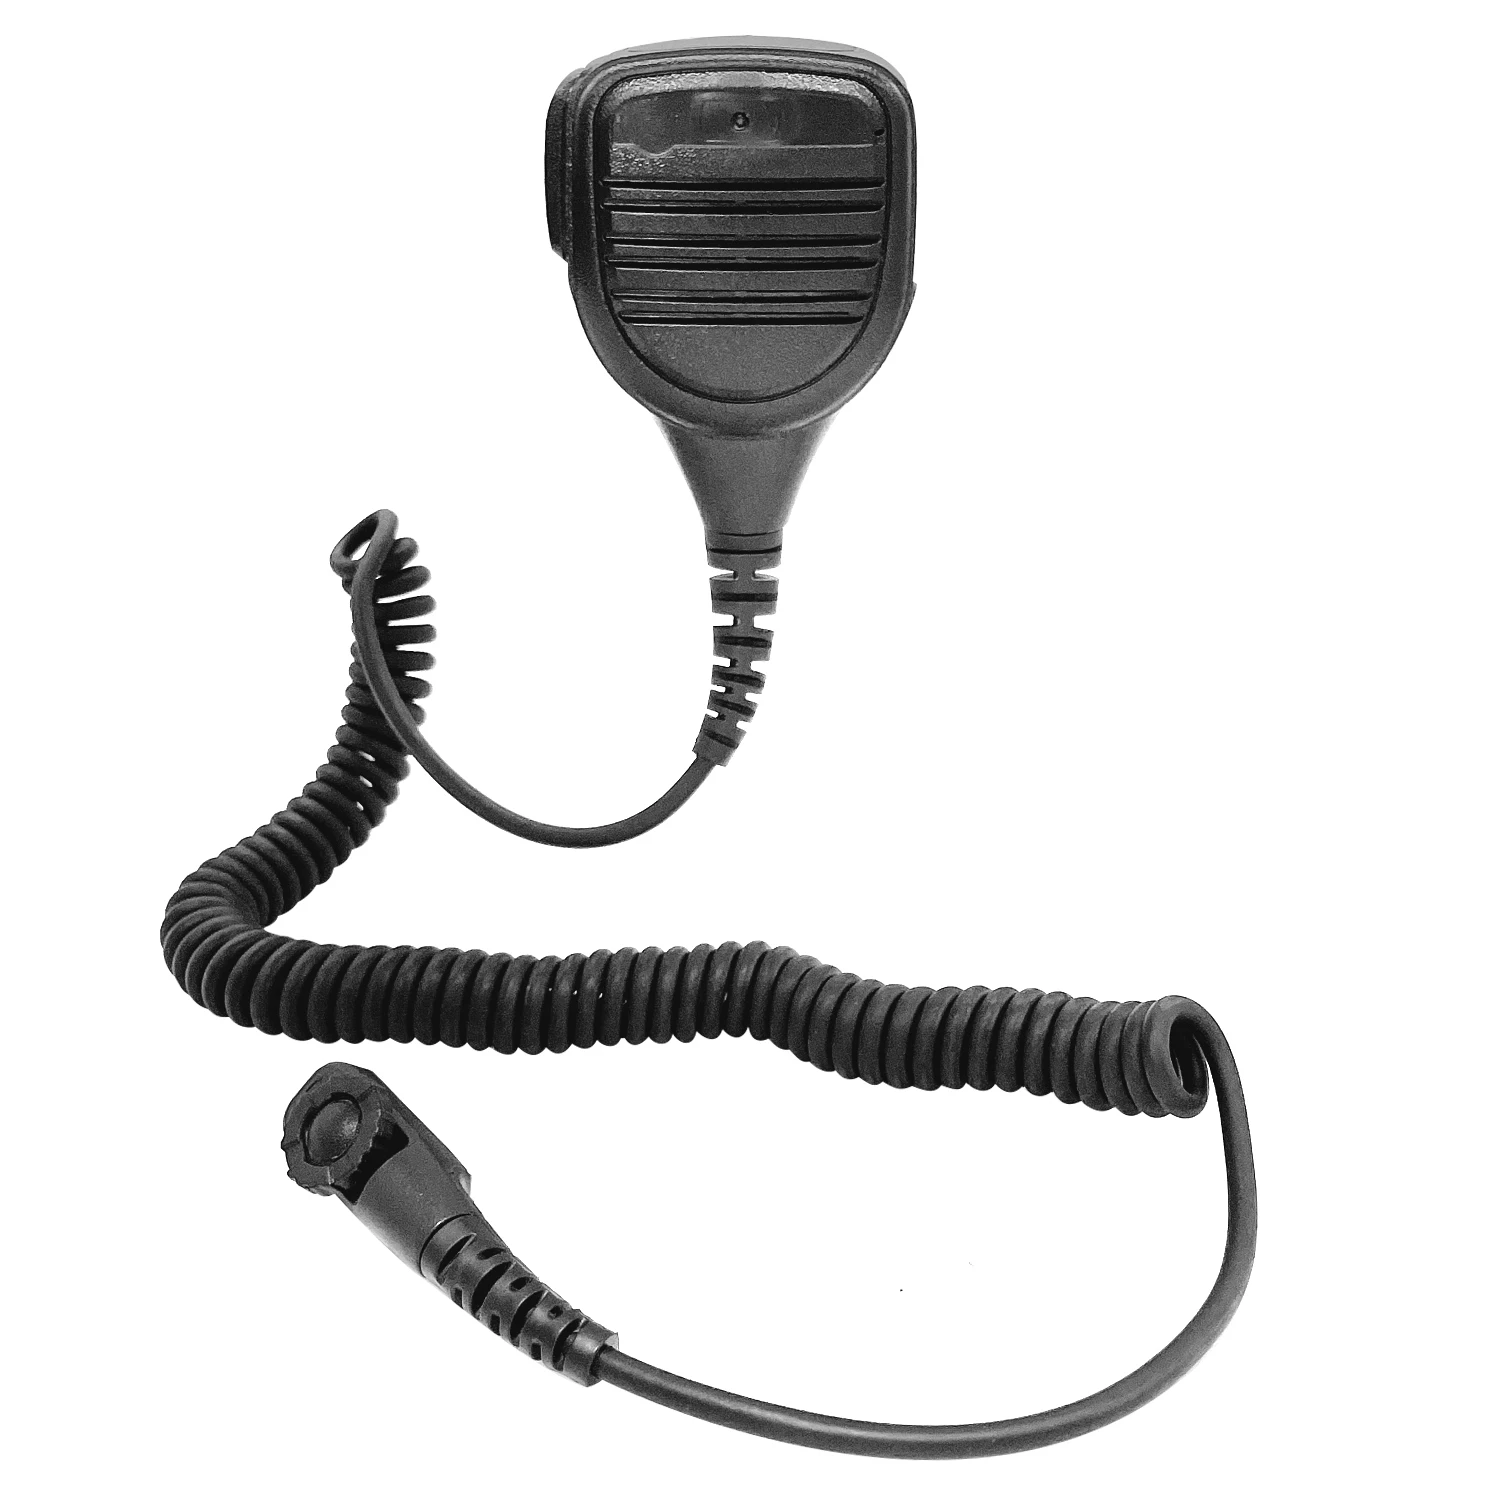 Remote Waterproof Speaker Microphone Mic, PTT for Hytera PD580, PD700, PD700G, PD702, PD702G, Walkie Talkie, Two Way Radio ptt handheld mic microphone walkie talkie 2 way radio sm18n2 for hytera hyt pd702 pd700 pd700g pd780 pd780g pd780gm